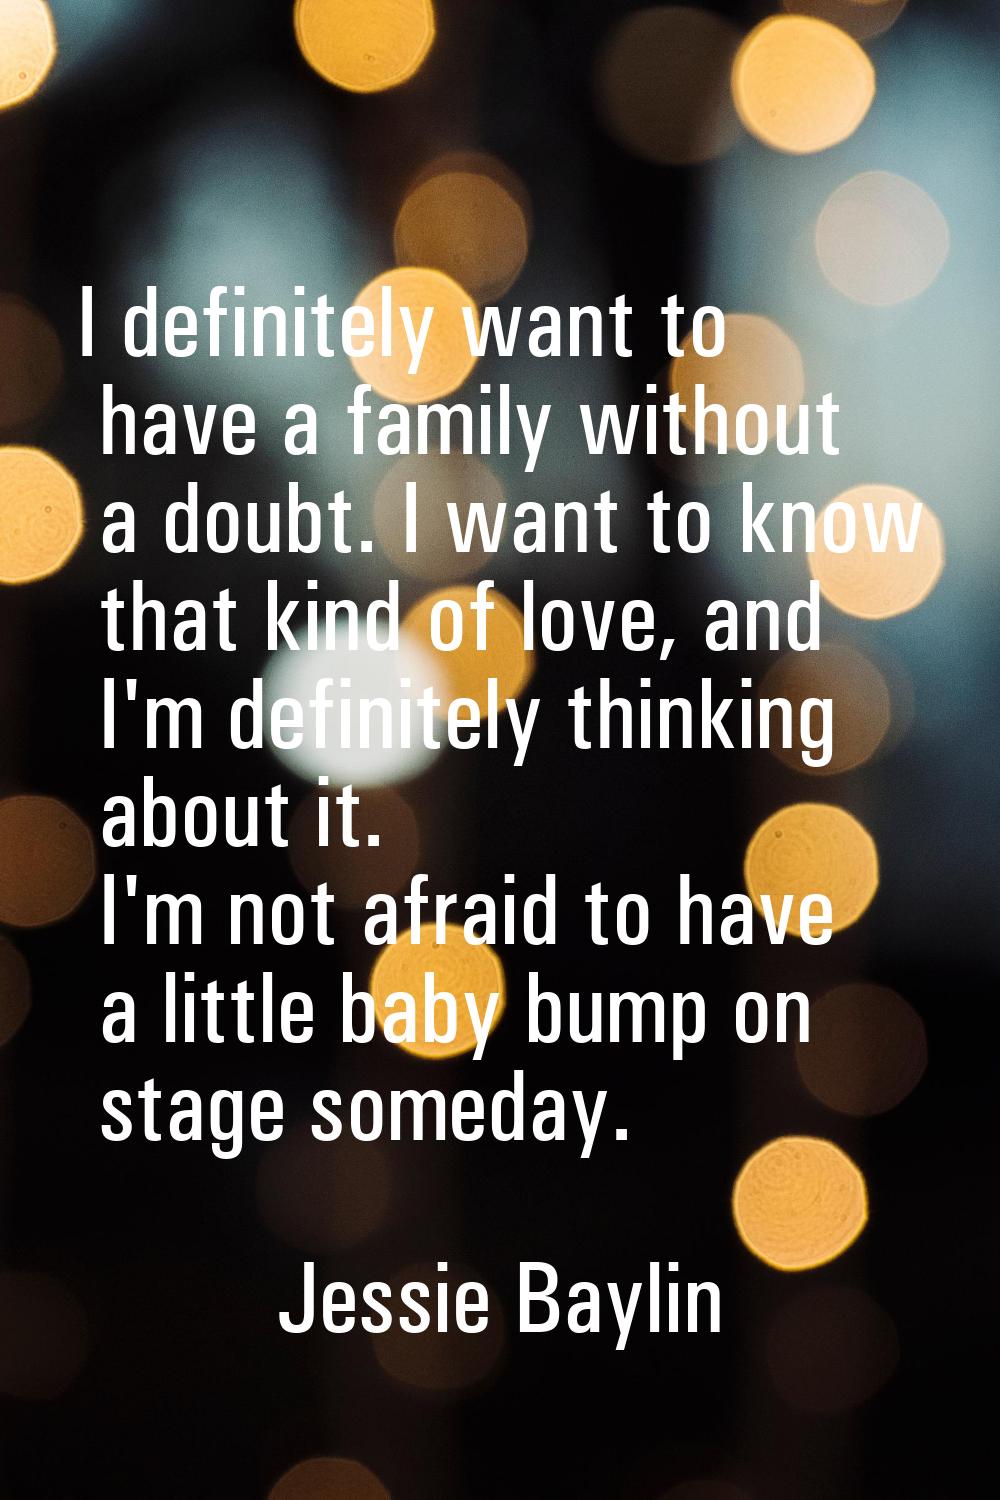 I definitely want to have a family without a doubt. I want to know that kind of love, and I'm defin